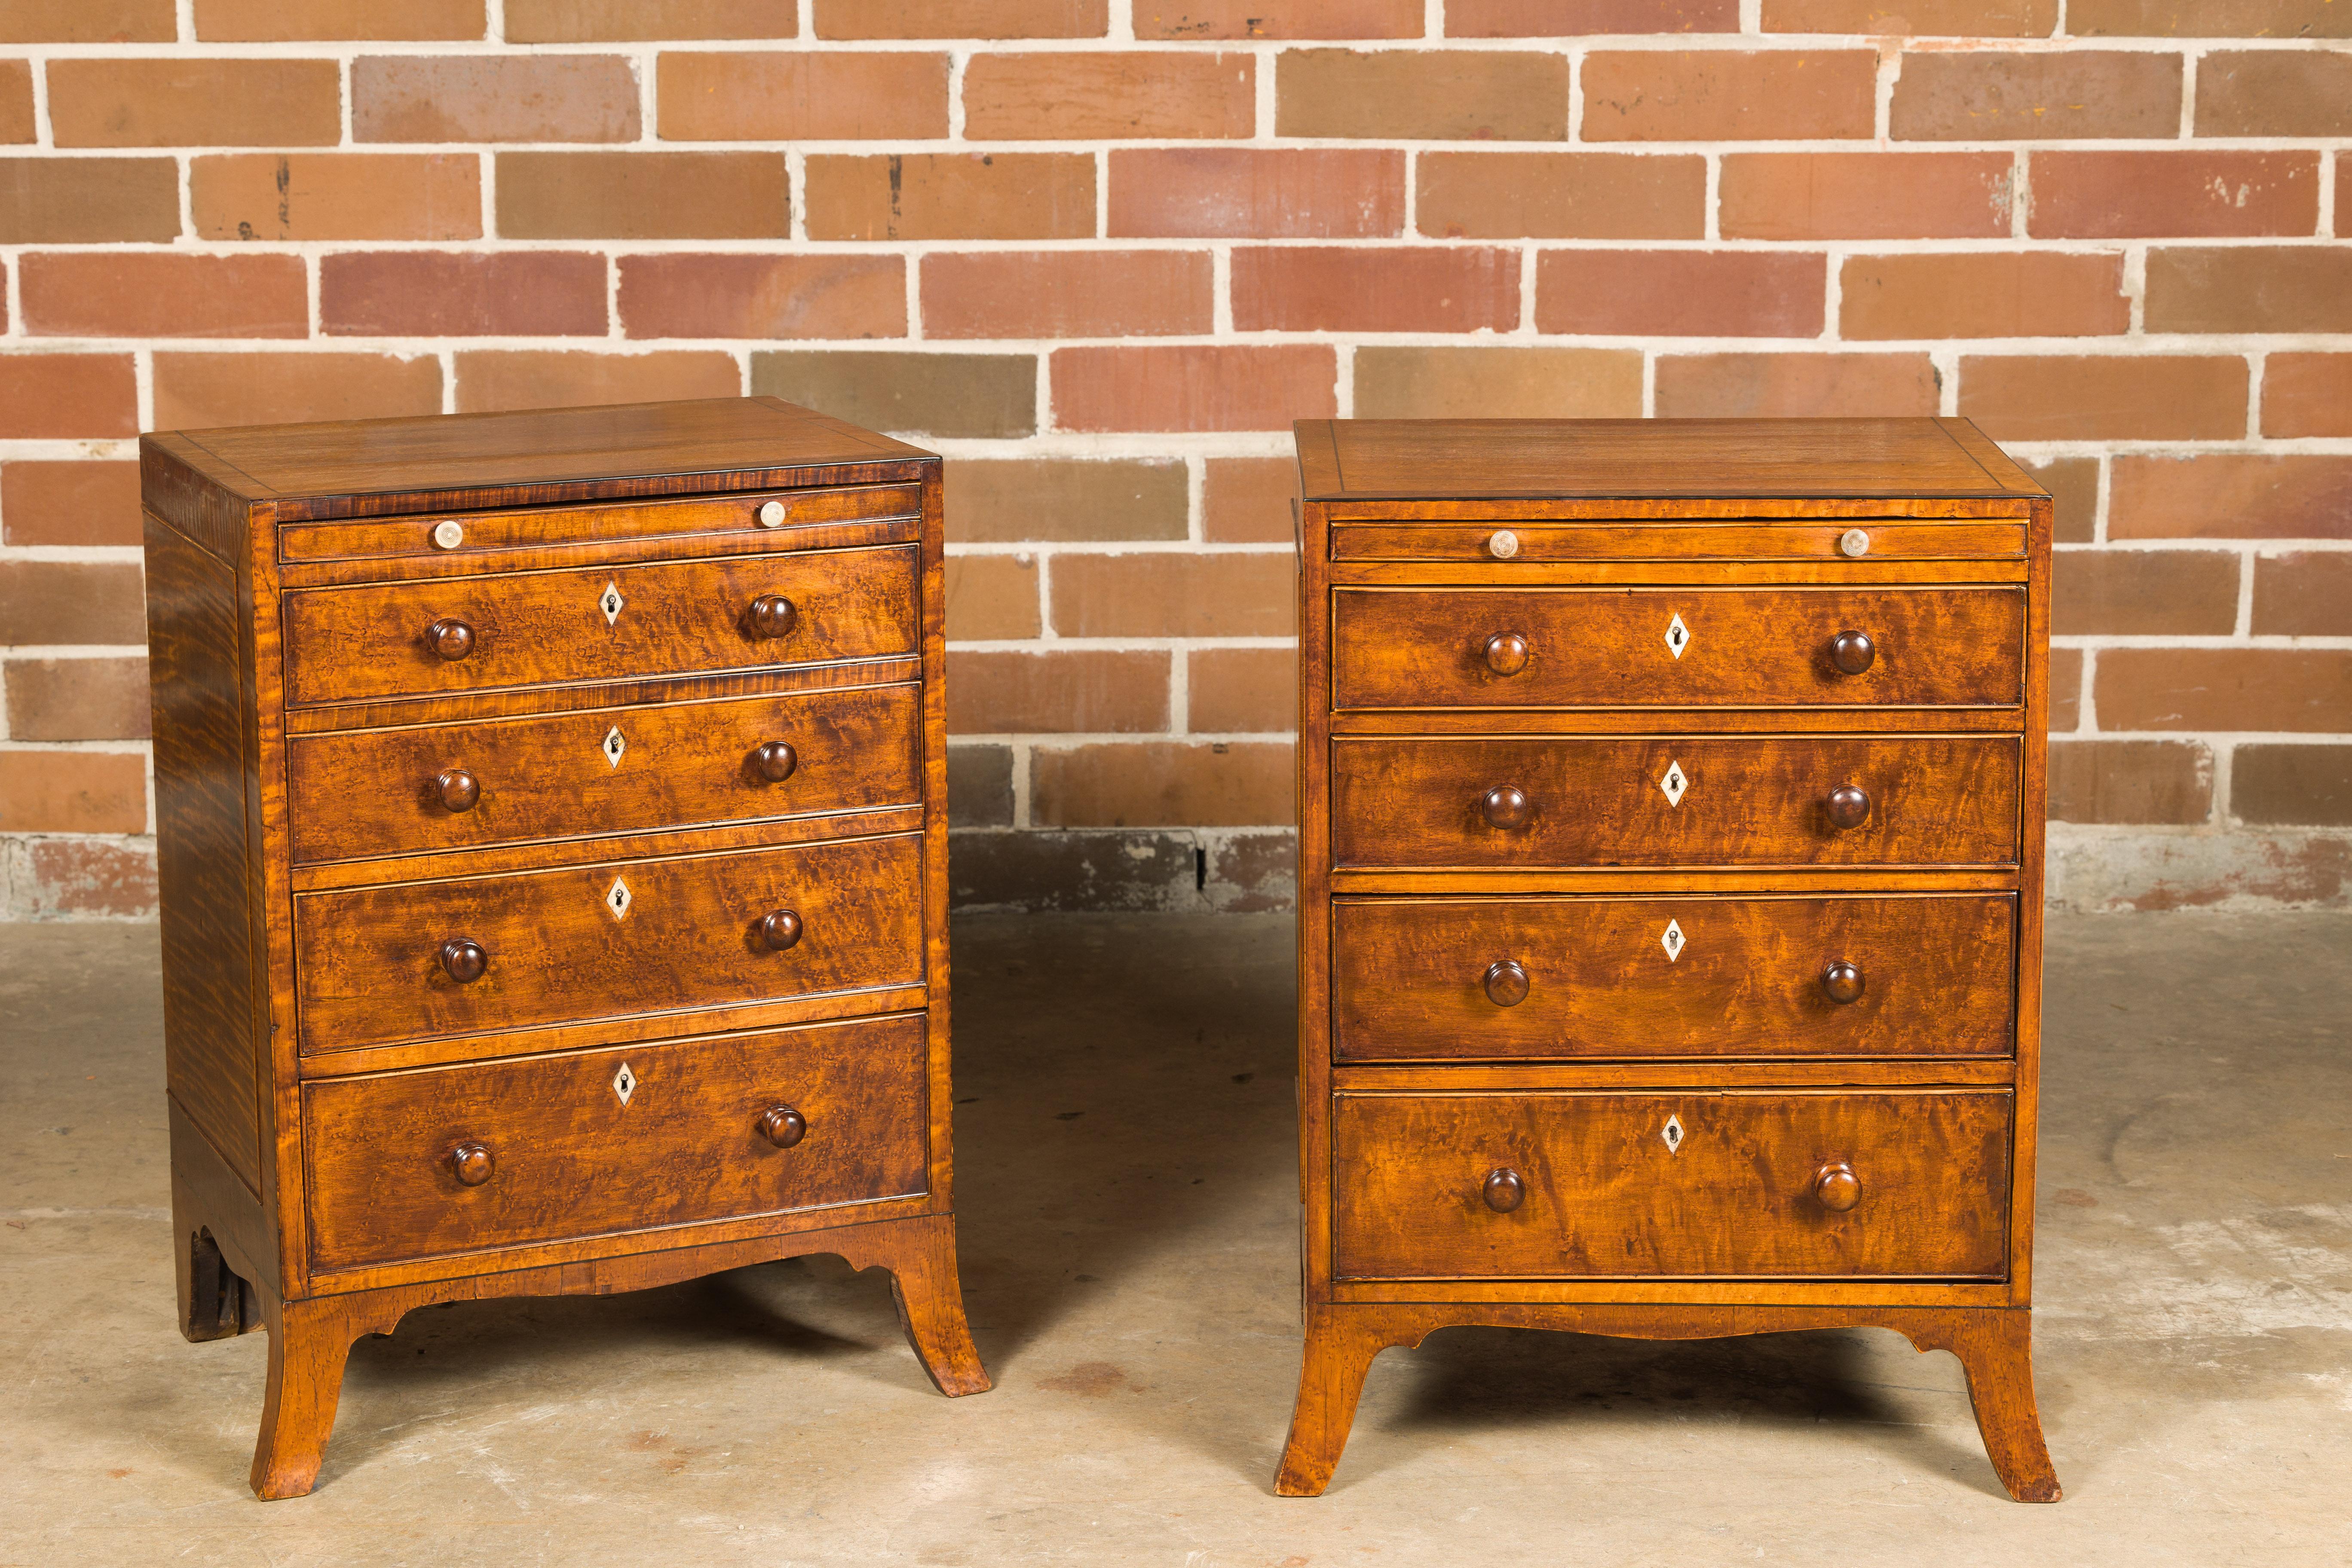 Cross-Banded English Regency Period 1820s Bedside Chests with Graduating Drawers For Sale